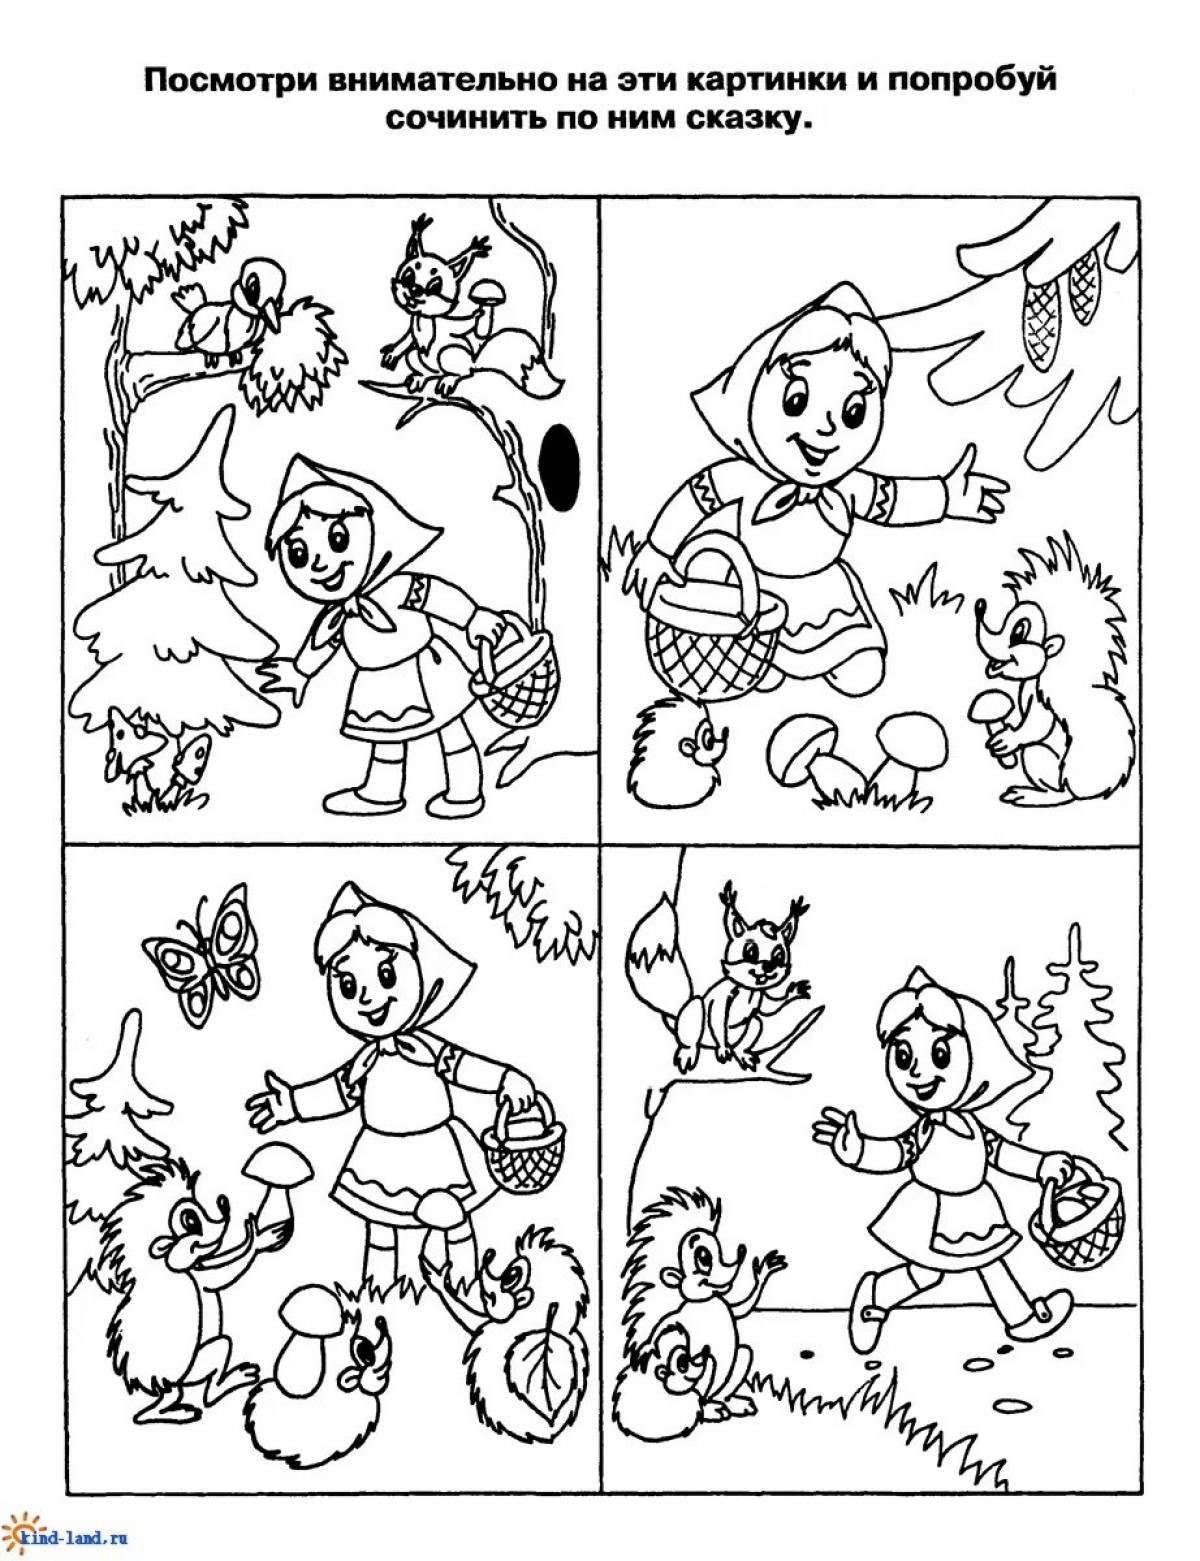 Humorous fairy tale coloring pages for preschoolers